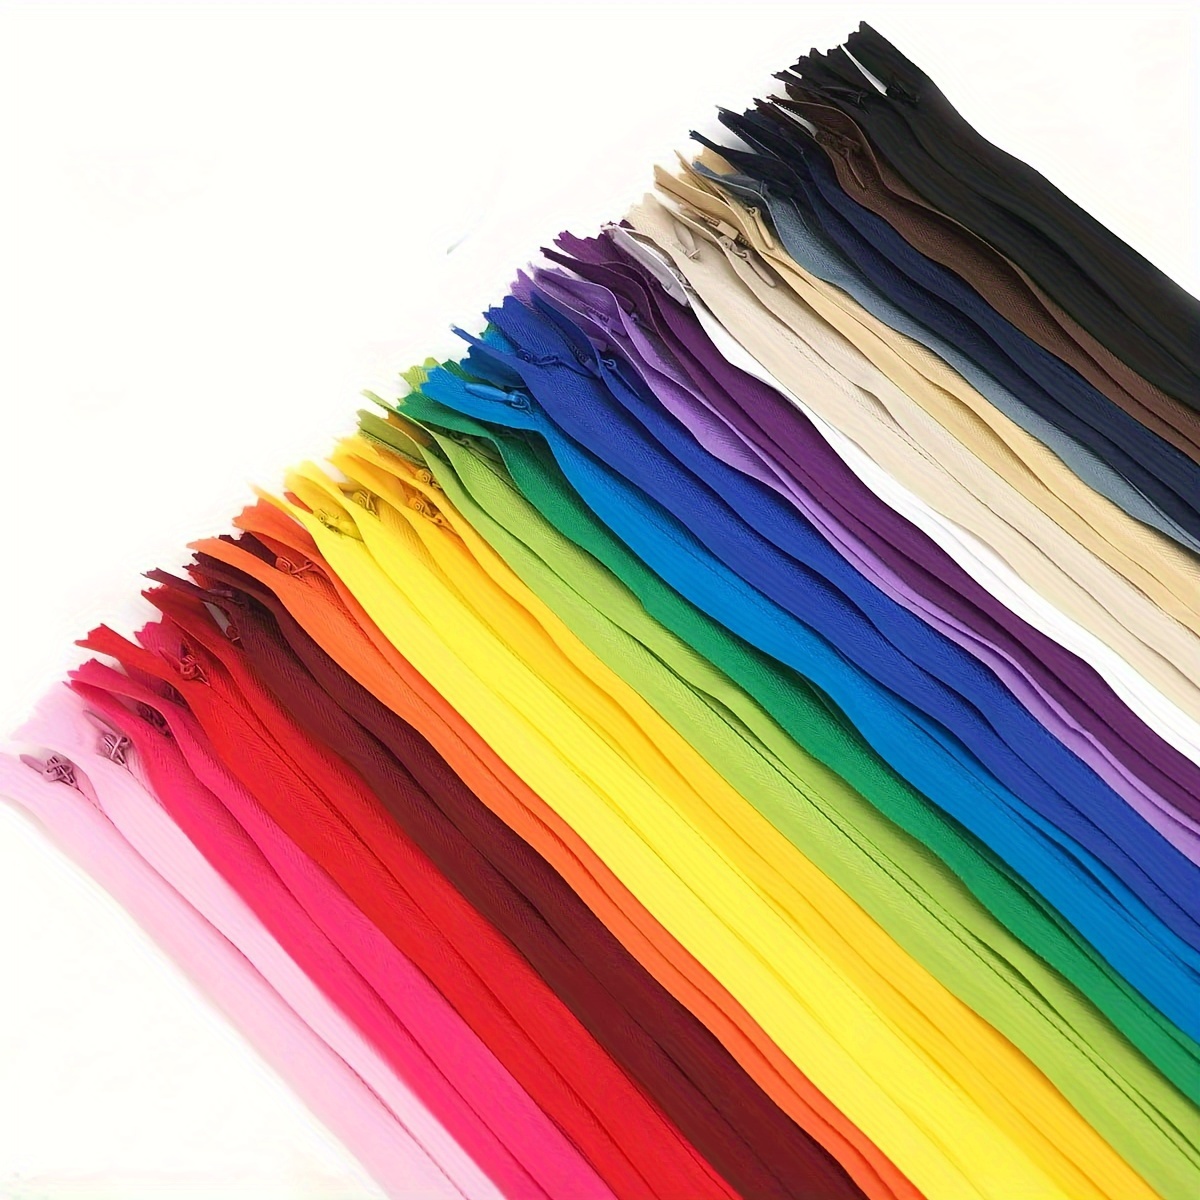 

30pcs Nylon Invisible Zippers, 16-inch For Sewing And Tailoring Projects, Assorted Colors, Smooth Open And Close Zipper Pack For Designers And Seamstresses